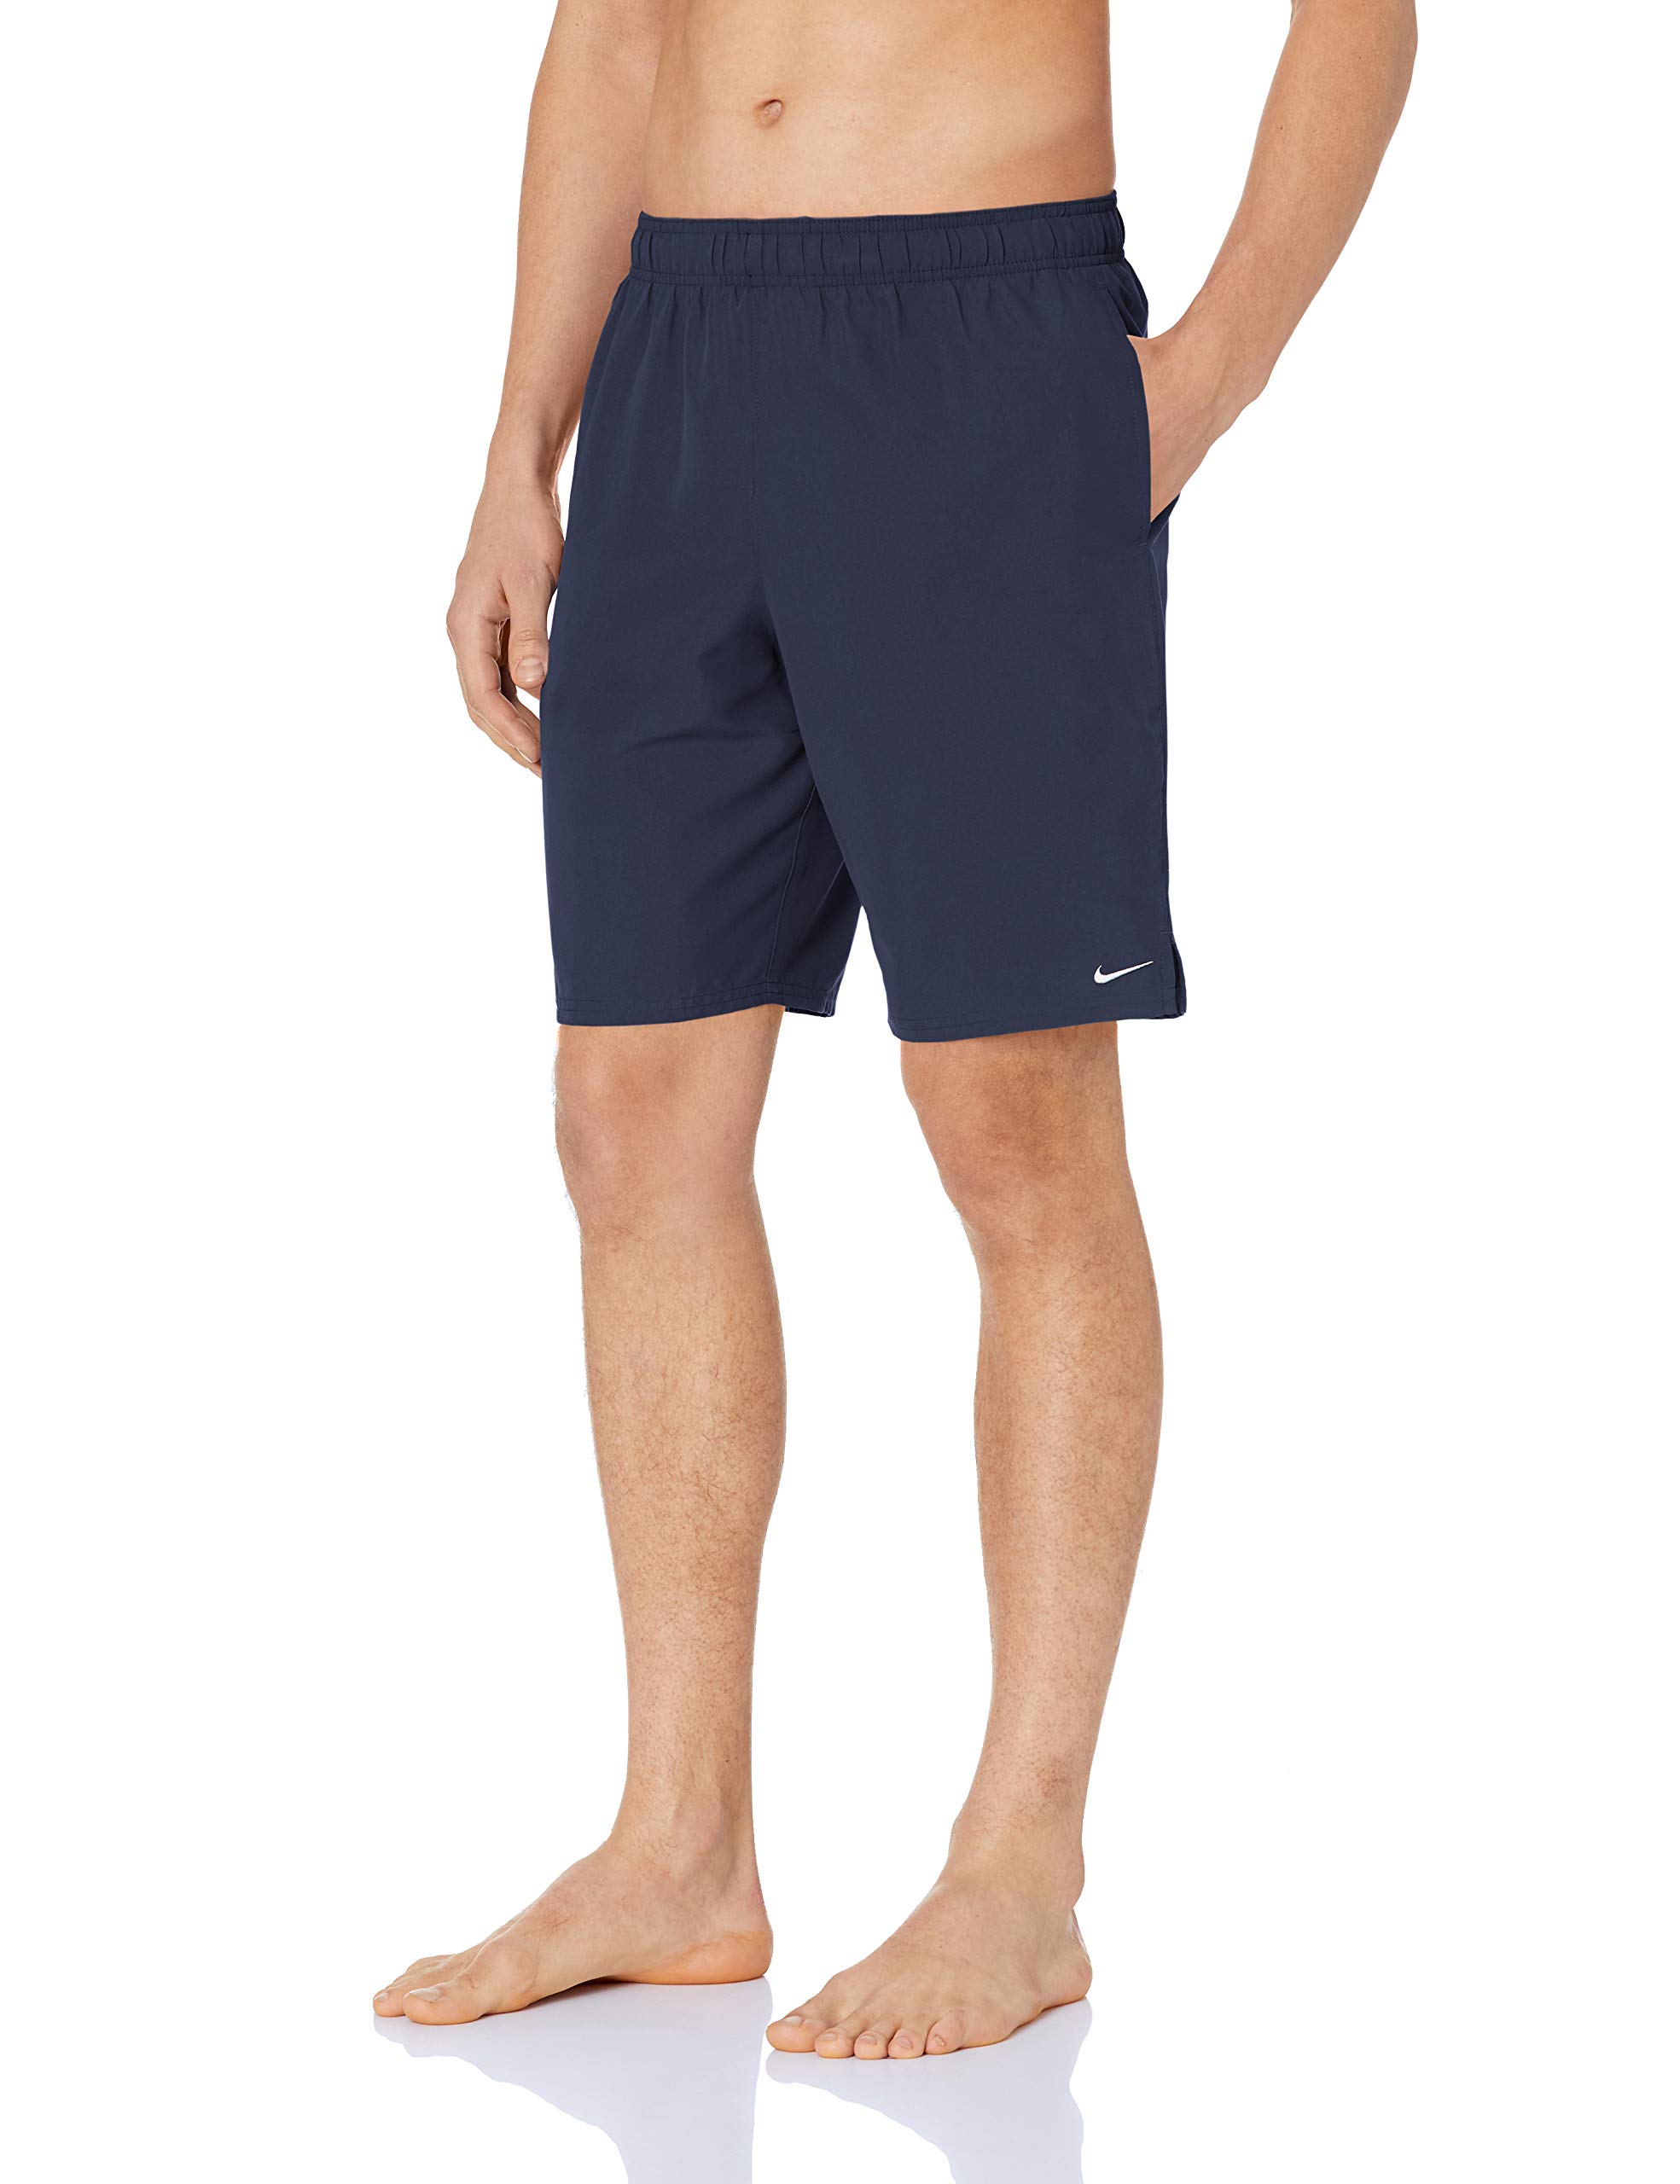 Nike Mens Solid Lap 9 Inch Volley Short Swim Trunk - Midnight Navy White - M